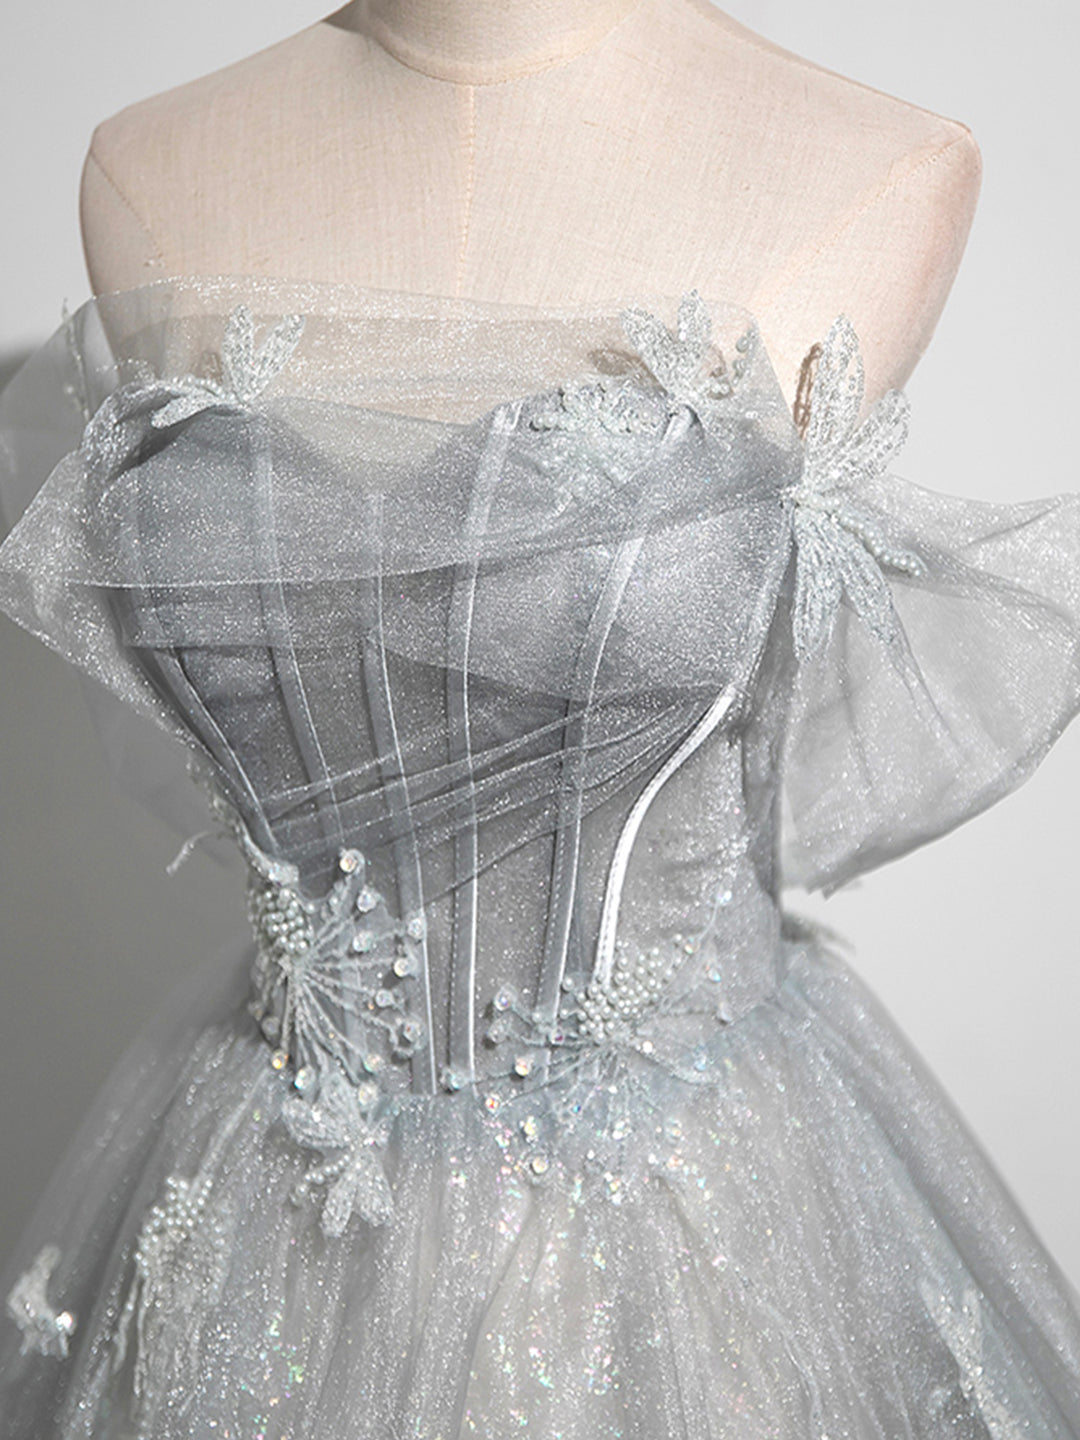 Prom Dresses For Warm Weather, A-Line Off the Shoulder Sparkly Prom Dress, Gray Tulle Corset Floor Length Evening Dress